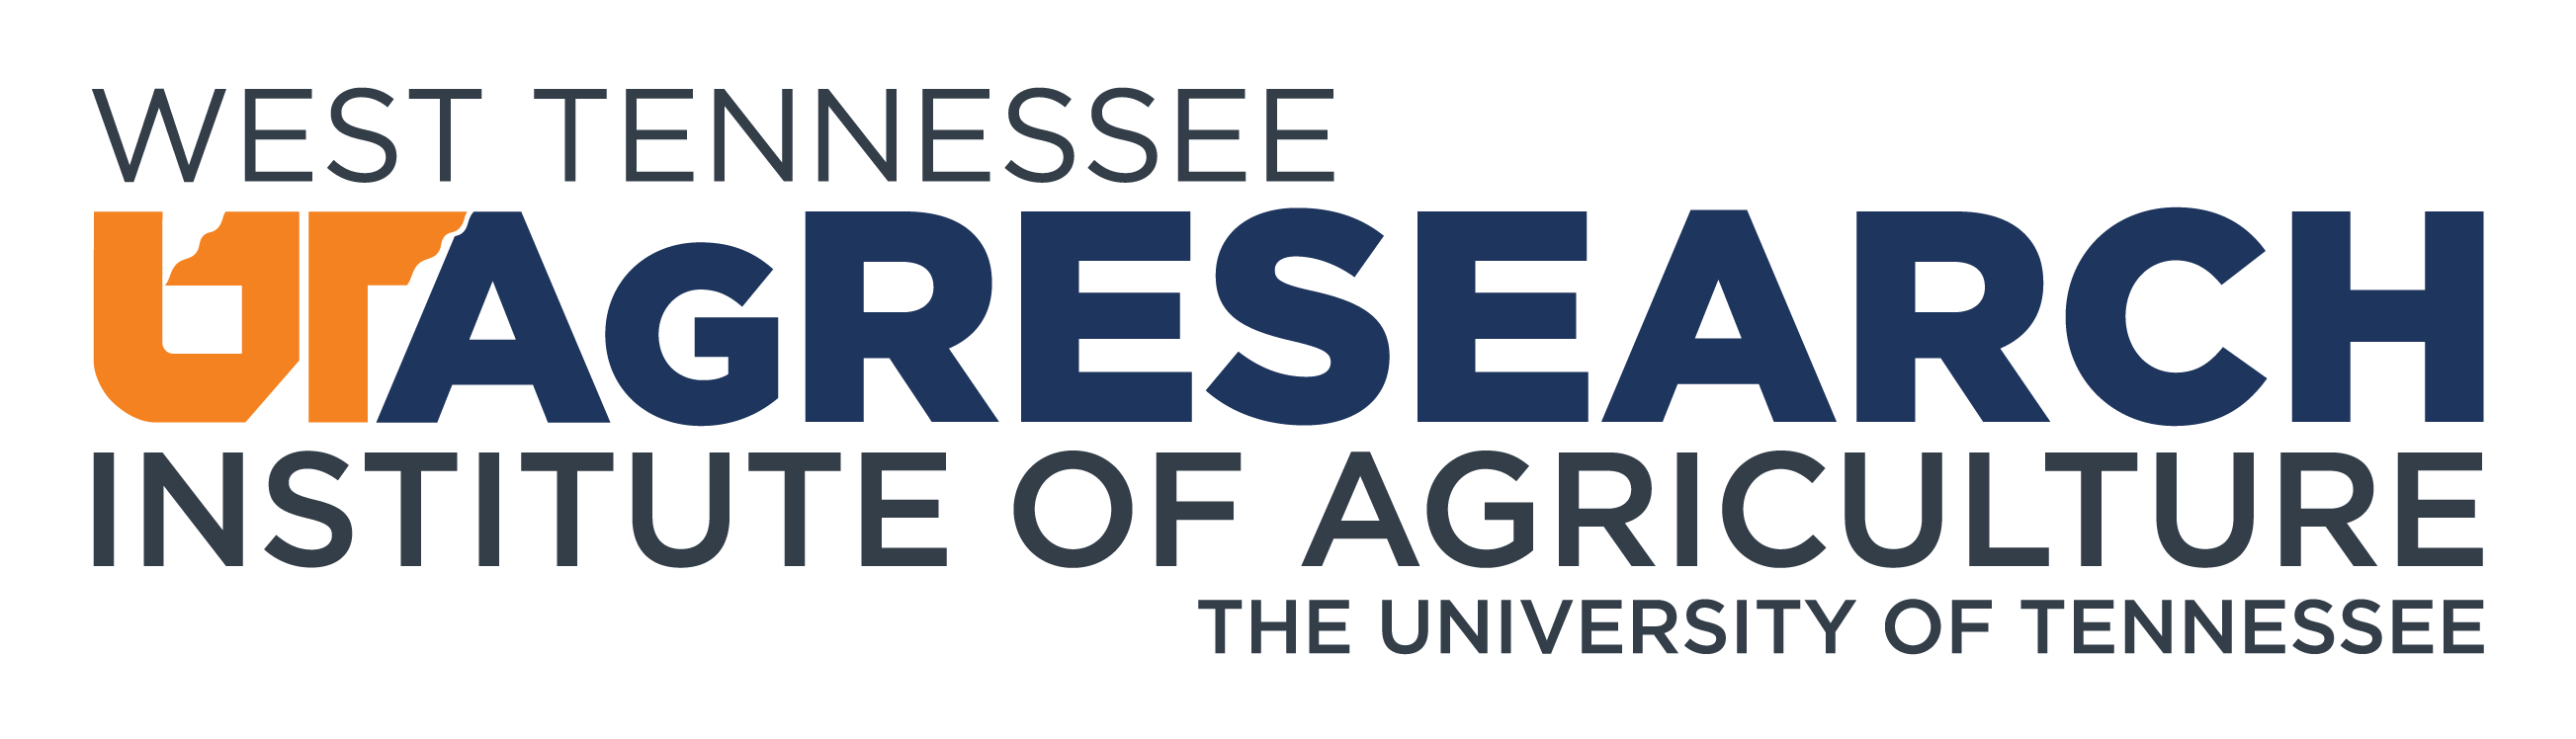 UT Agresearch_westtennessee_4c-01.png